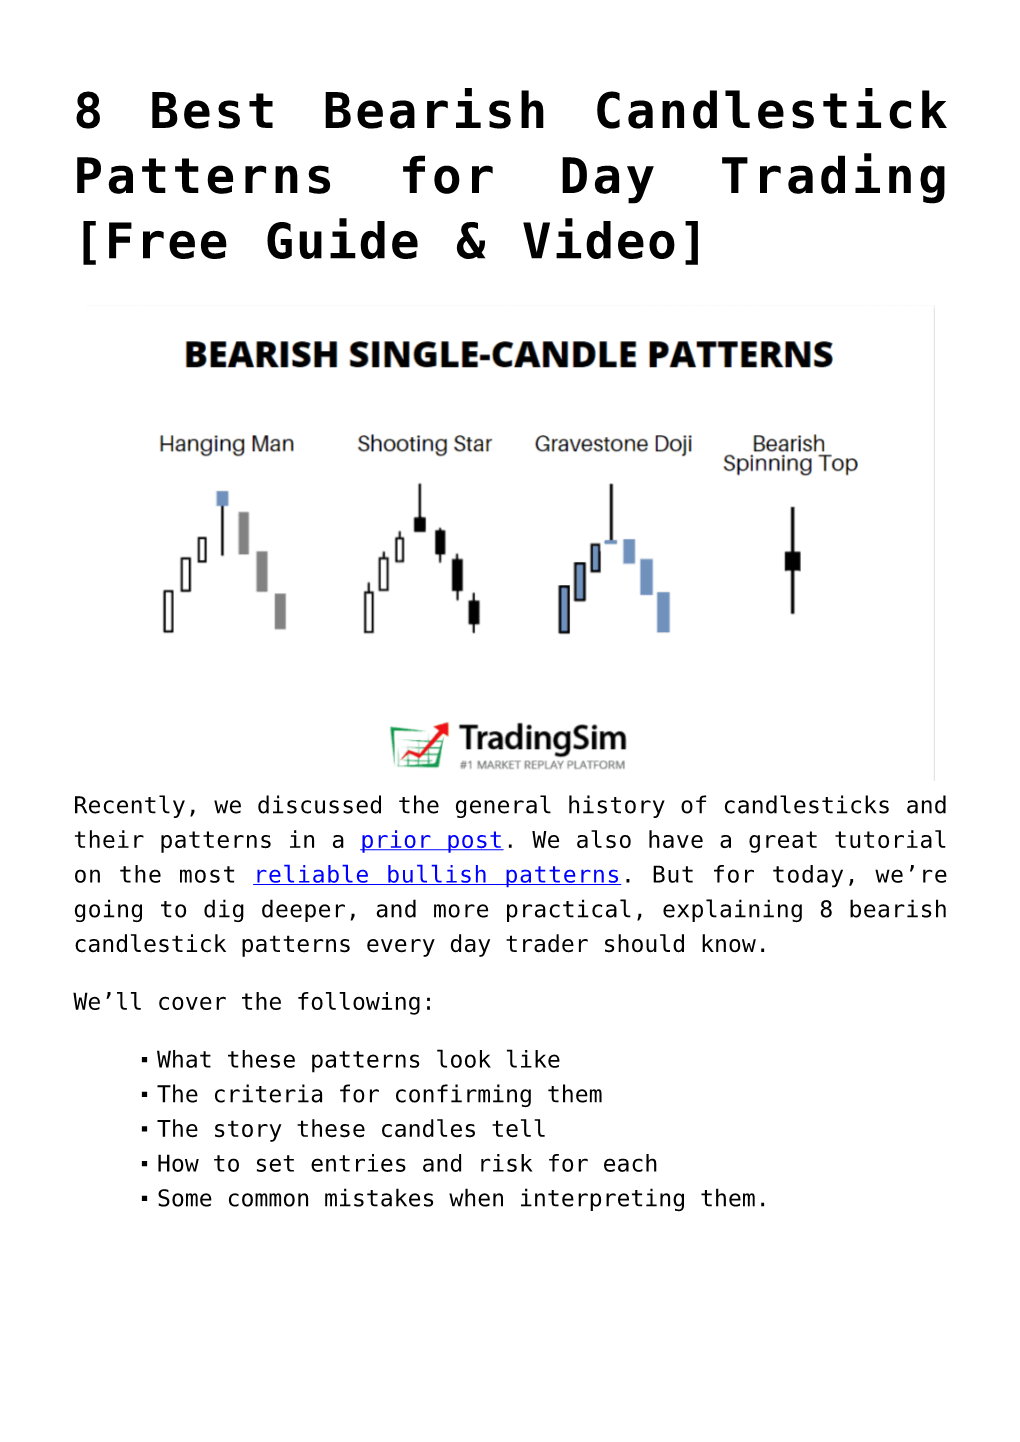 8 Best Bearish Candlestick Patterns for Day Trading [Free Guide & Video]